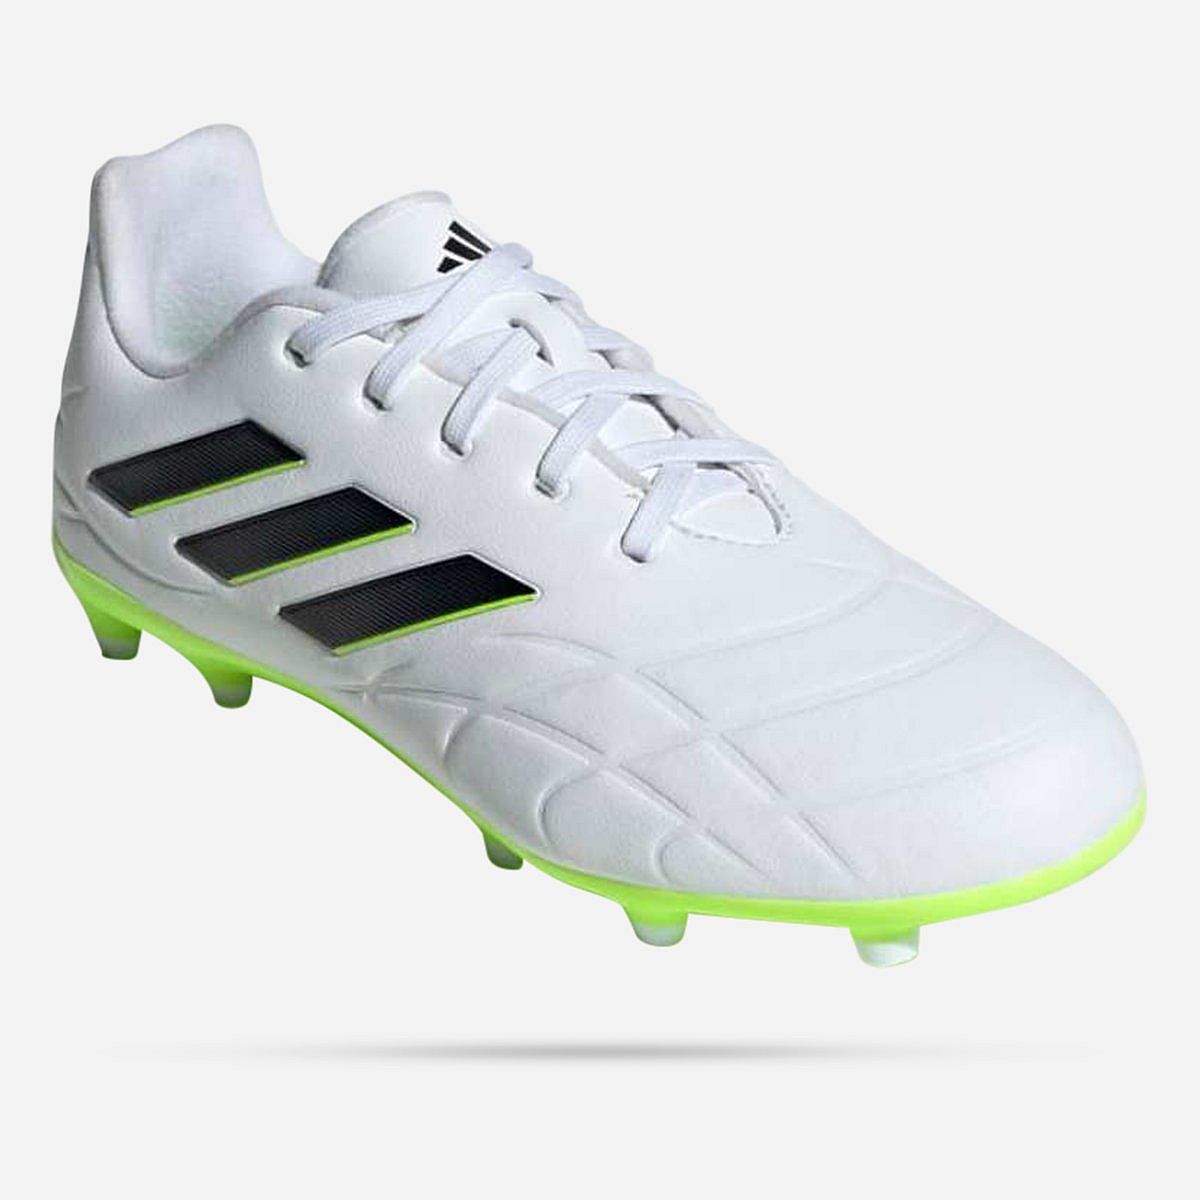 AN301871 Copa Pure.3 Football boots Firm Ground